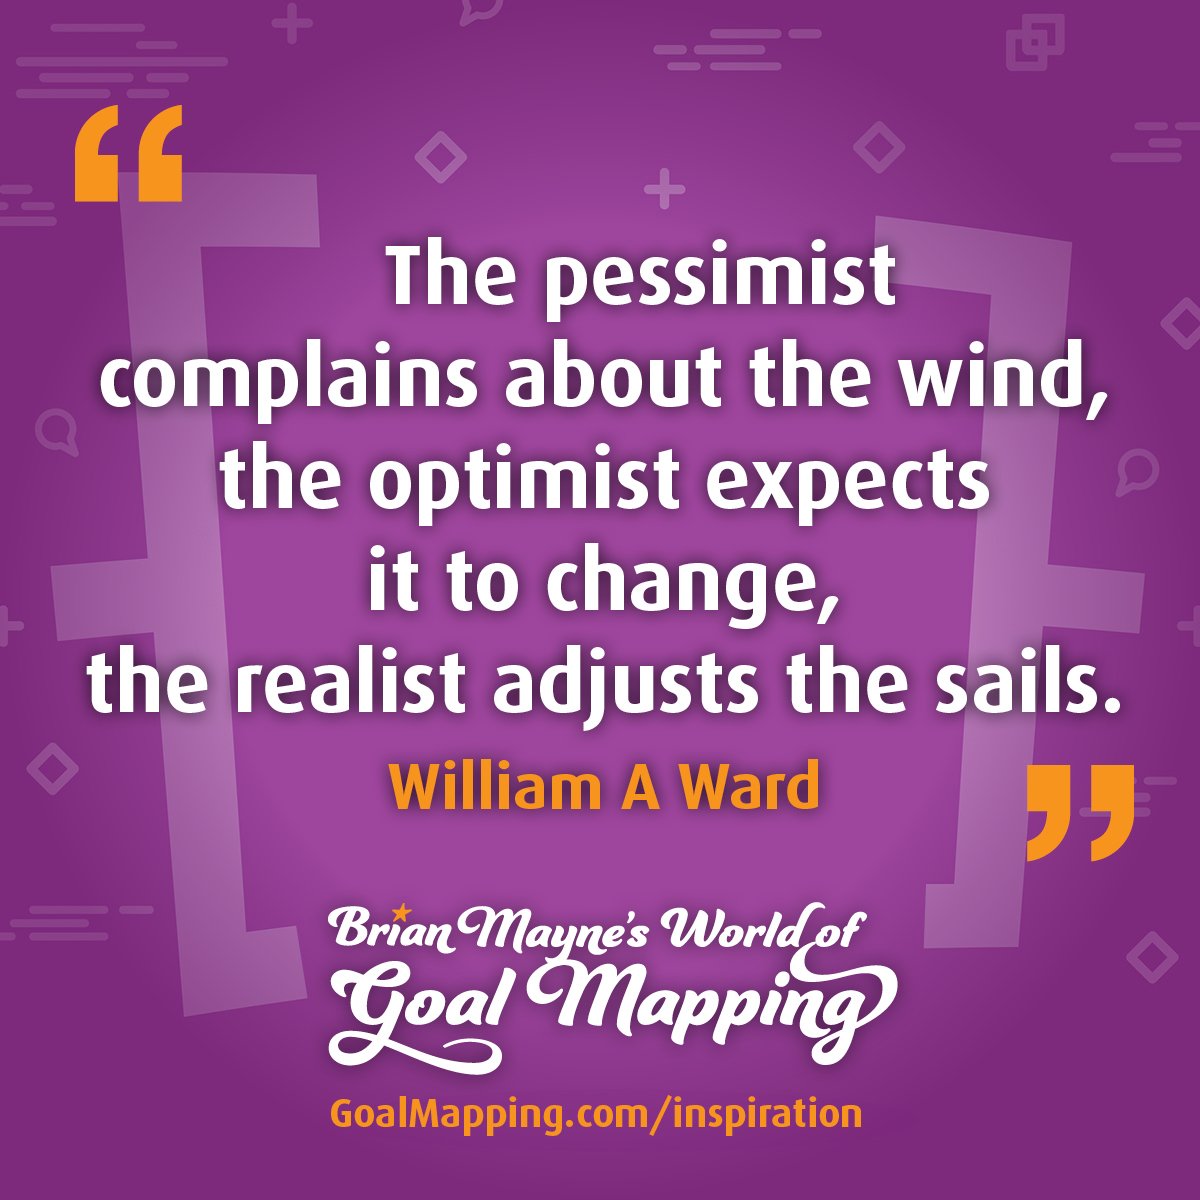 "The pessimist complains about the wind, the optimist expects it to change, the realist adjusts the sails." William A Ward